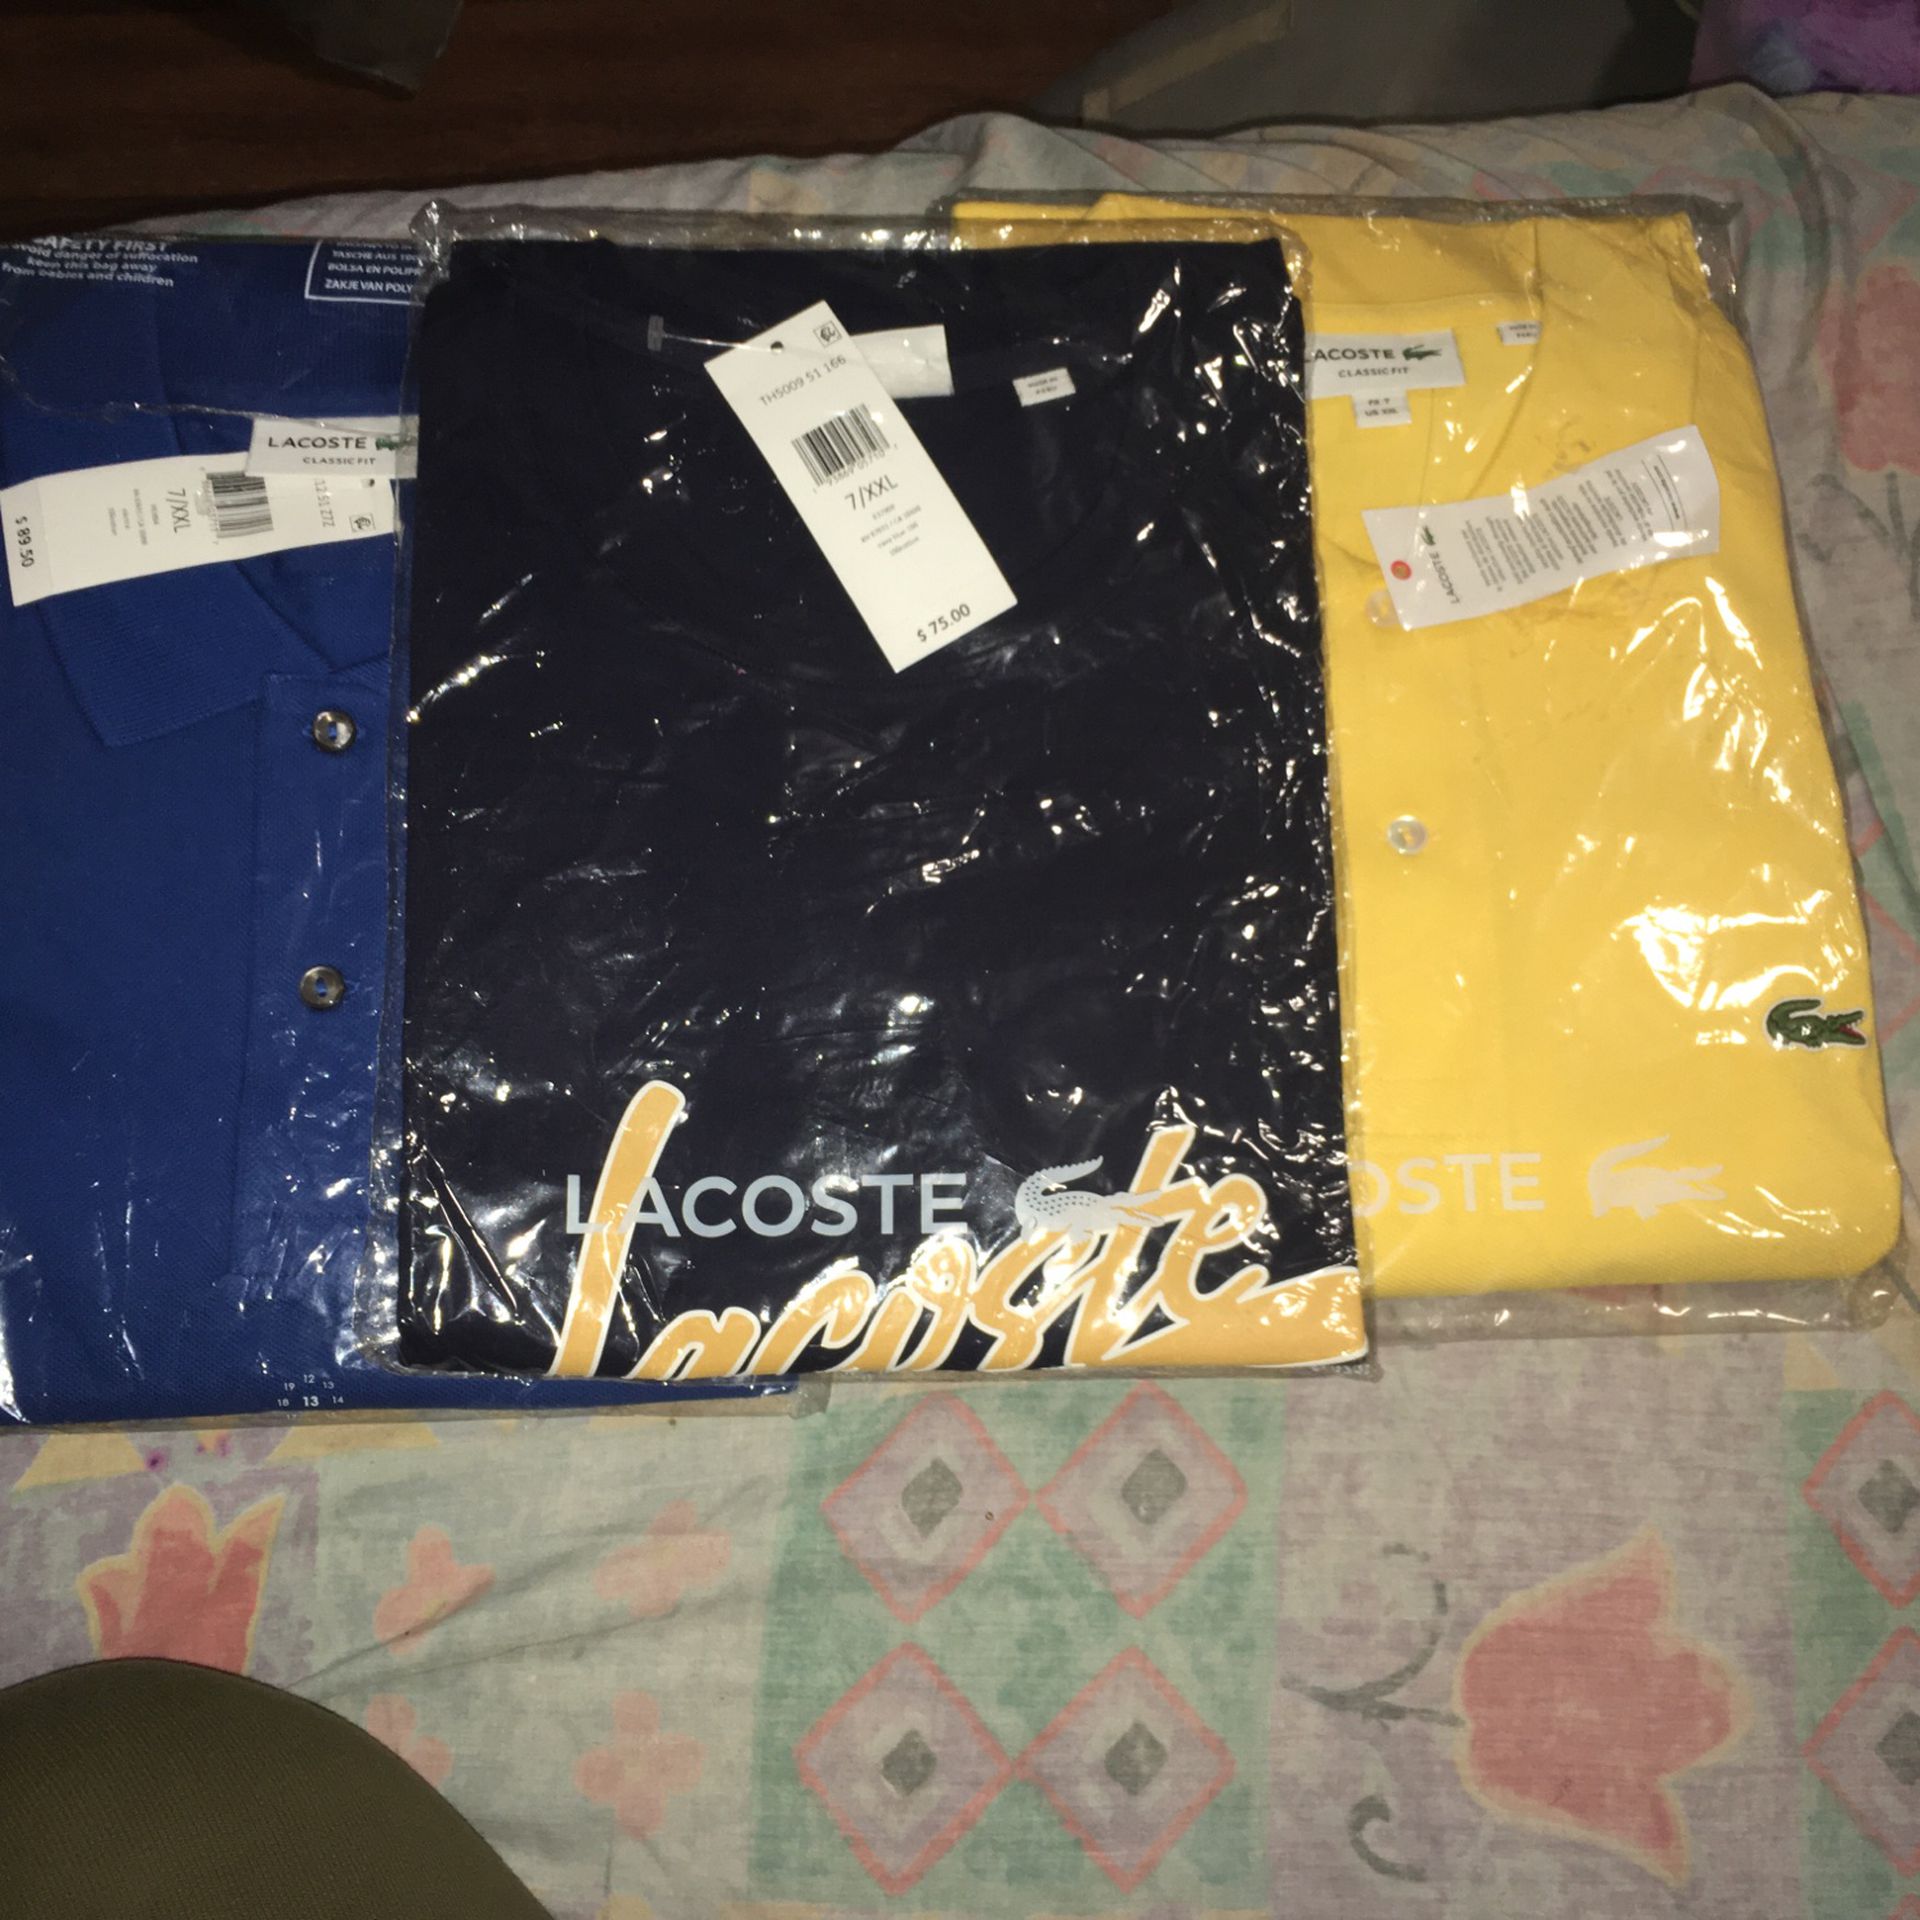 Lacoste Collection